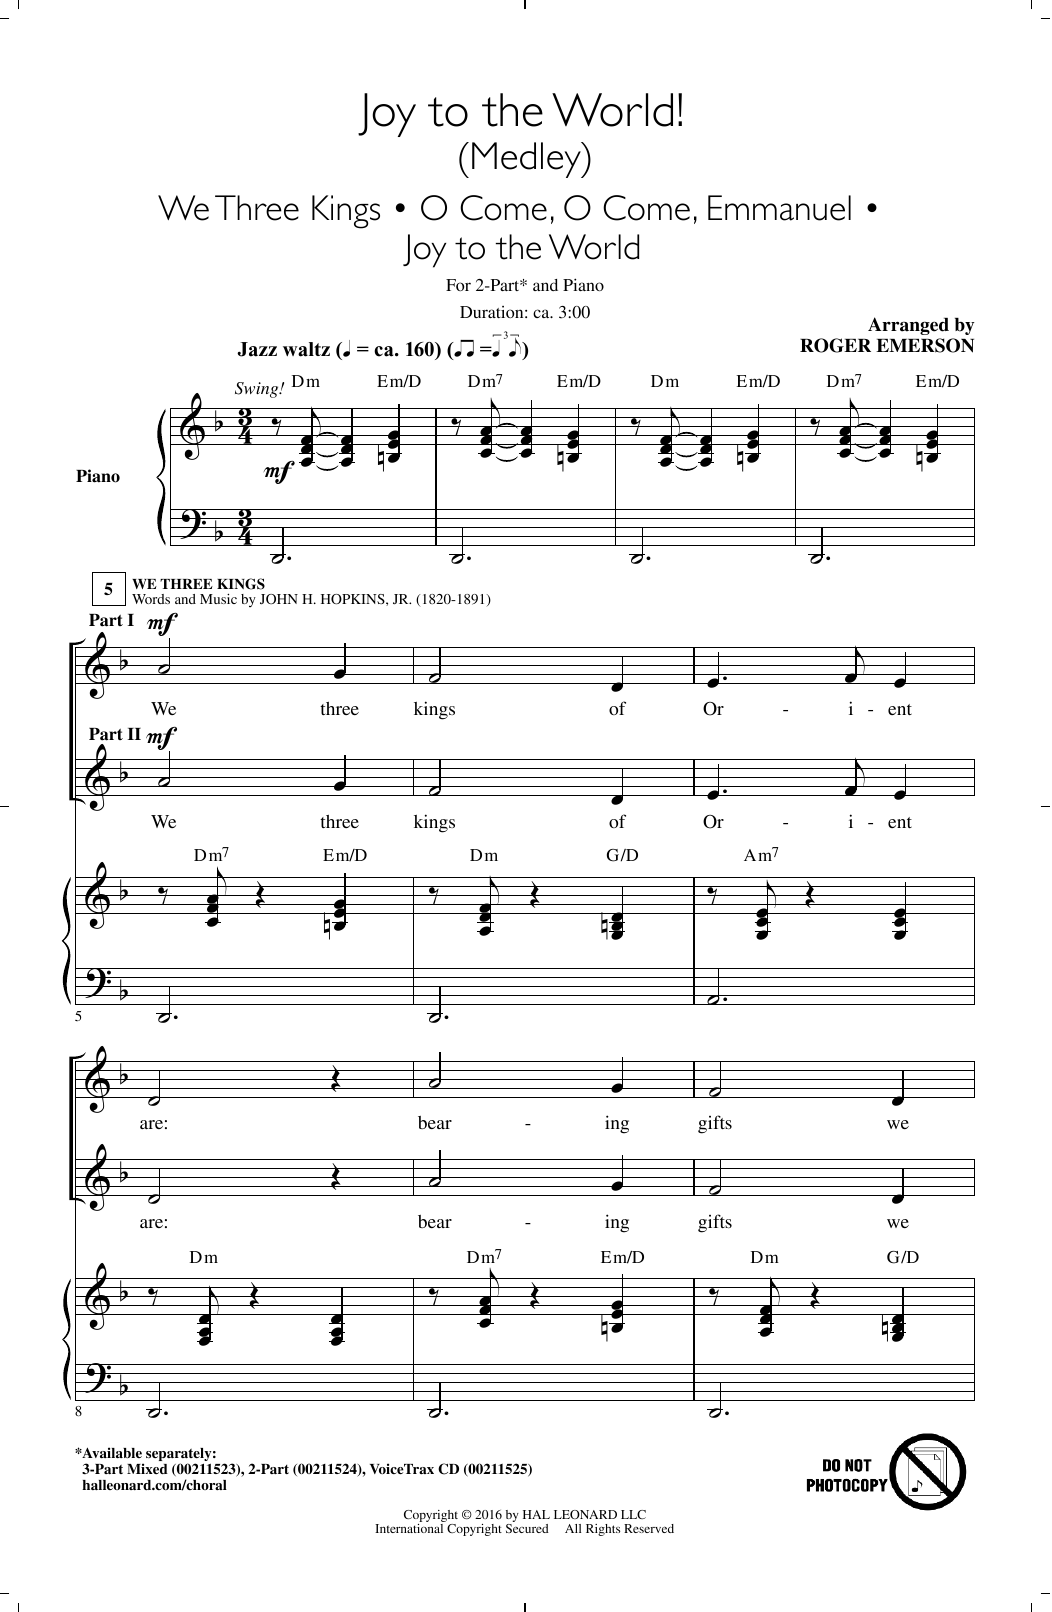 Download Roger Emerson Joy To The World! (Medley) Sheet Music